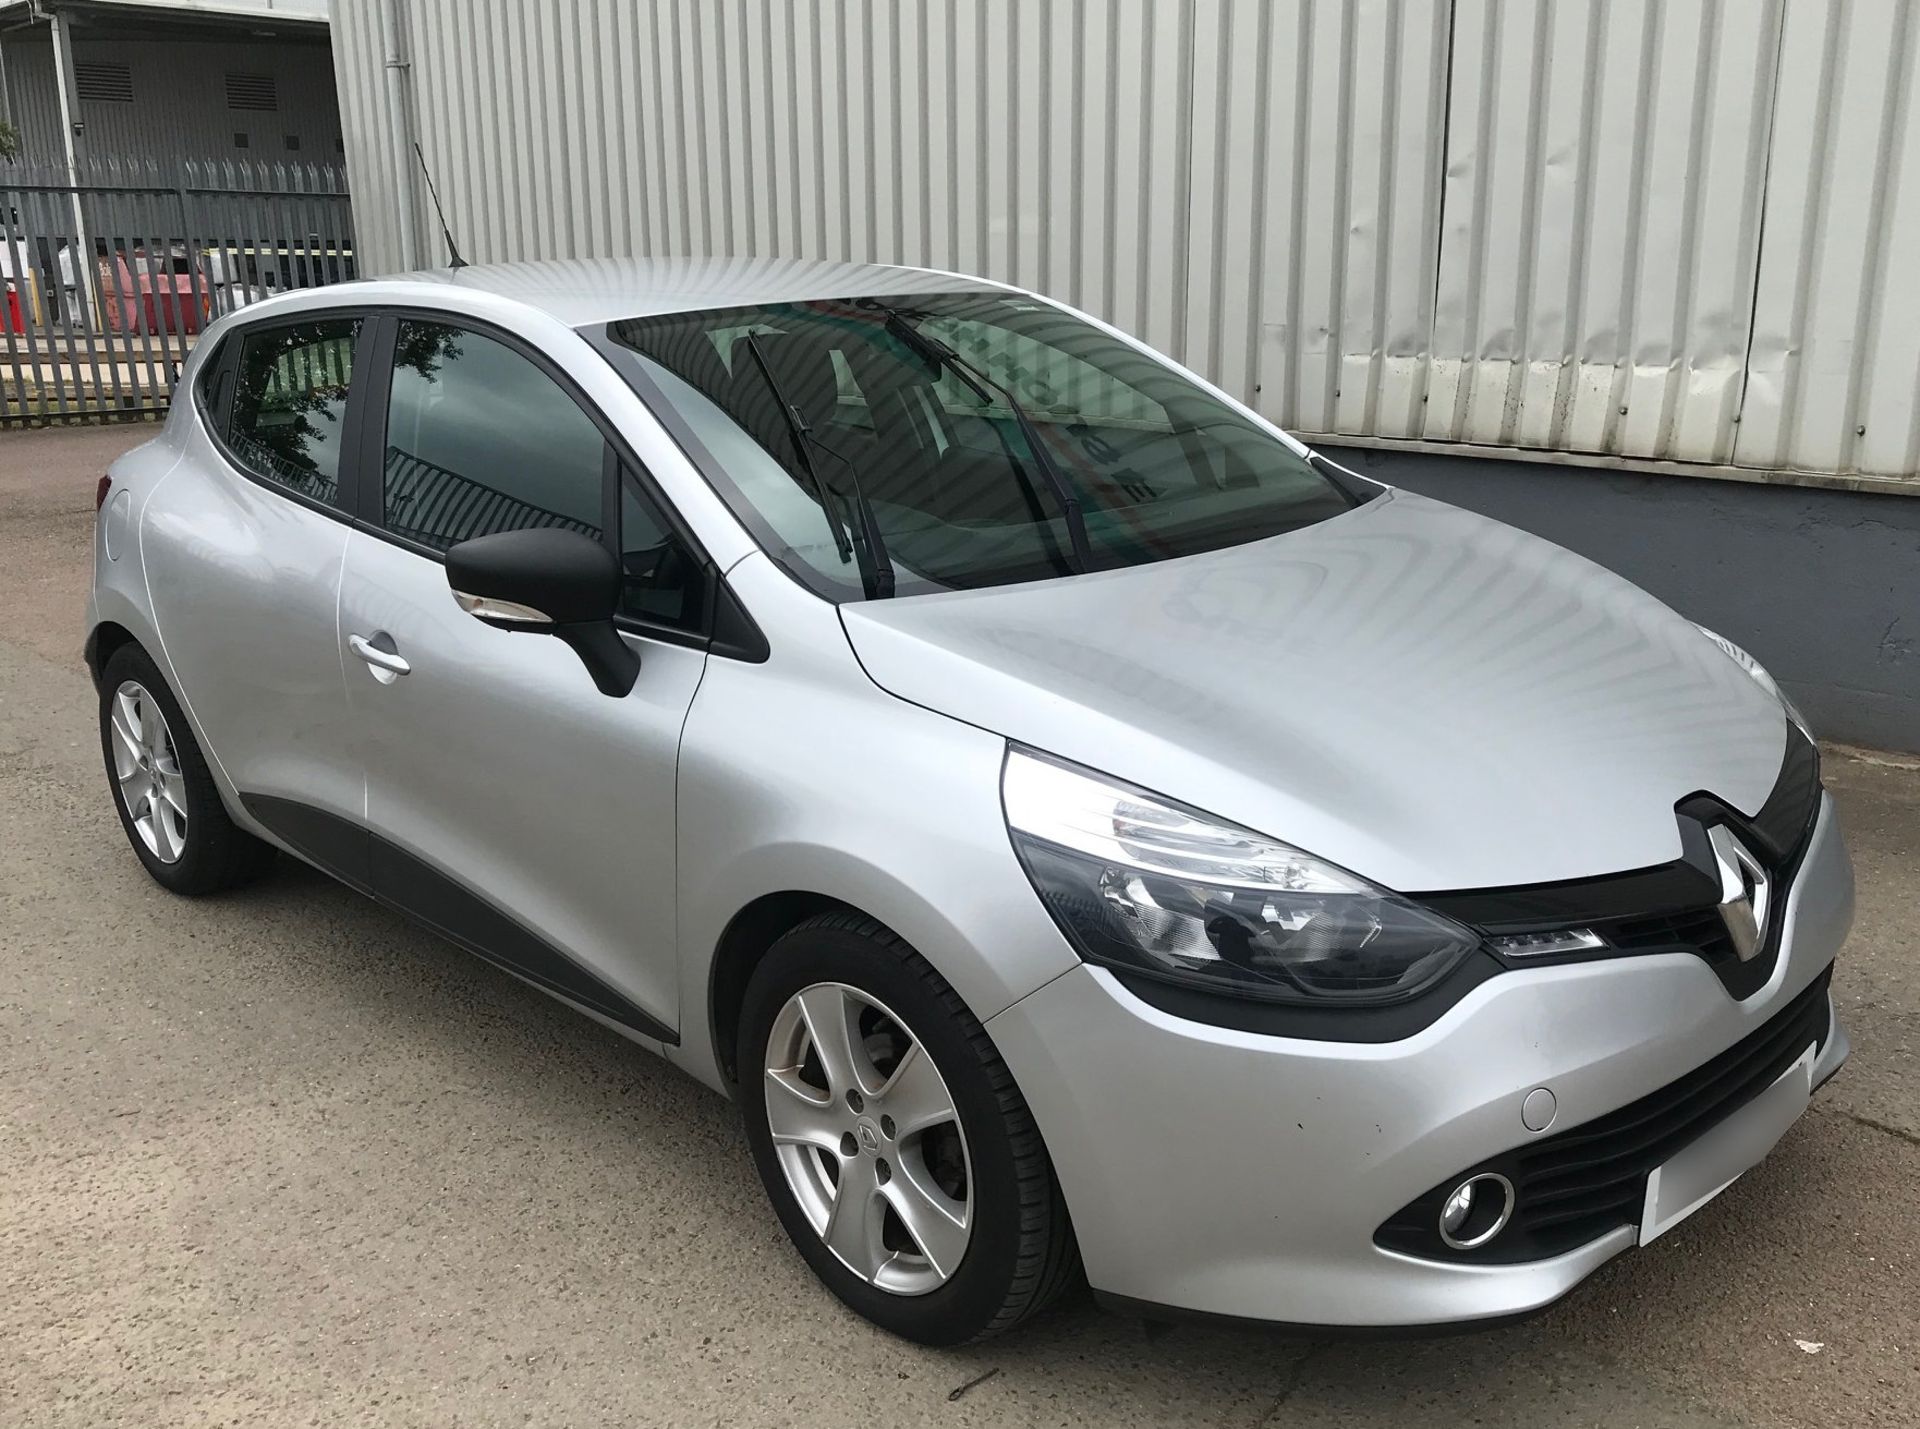 2015 Renault Clio 1.5 Dci Expression + Eco 5 Dr Hatchback - 1 YEARS MOT - CL505 - NO VAT ON THE HAM